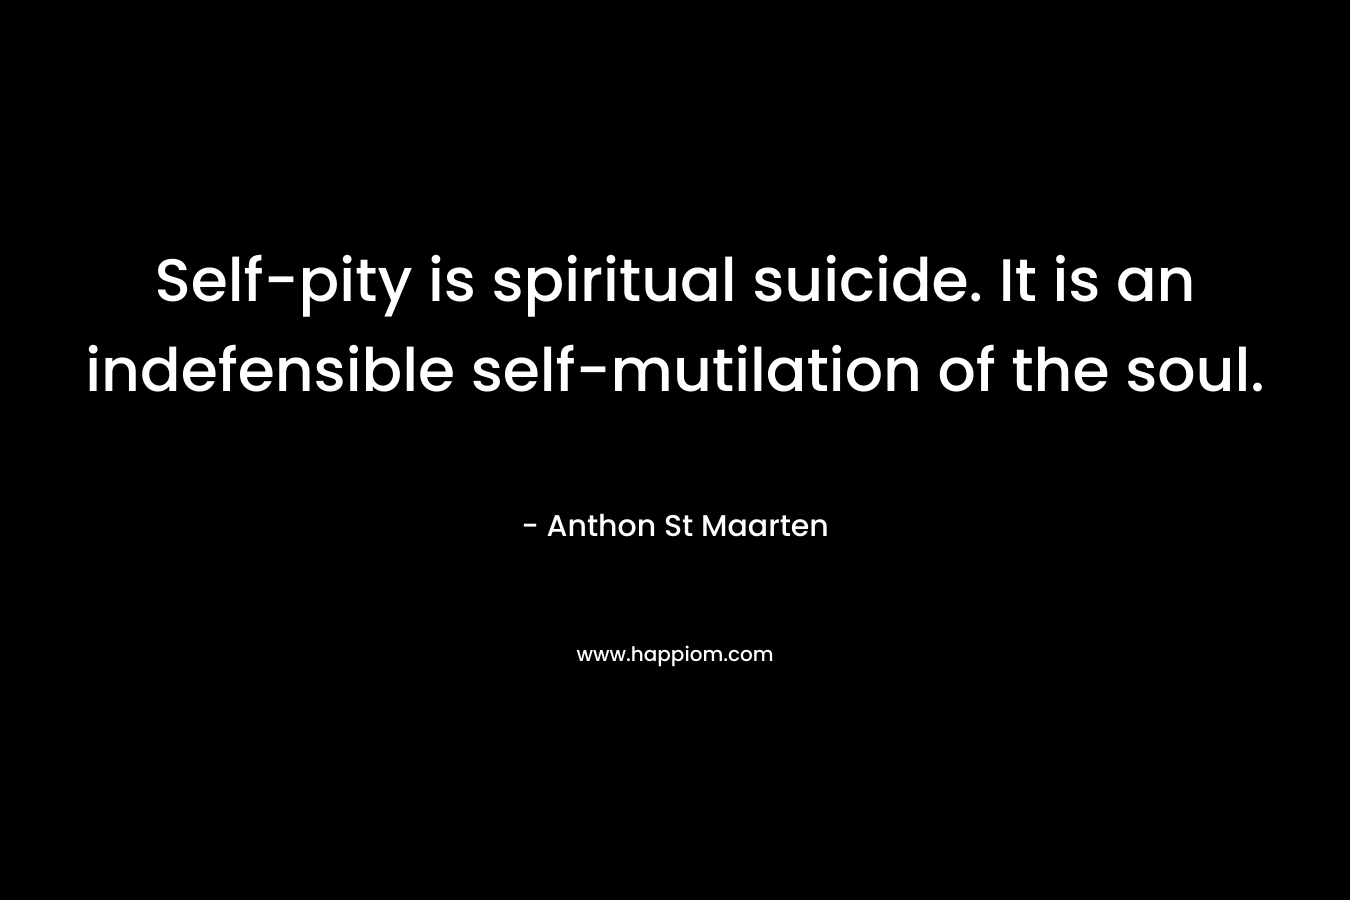 Self-pity is spiritual suicide. It is an indefensible self-mutilation of the soul. – Anthon St Maarten